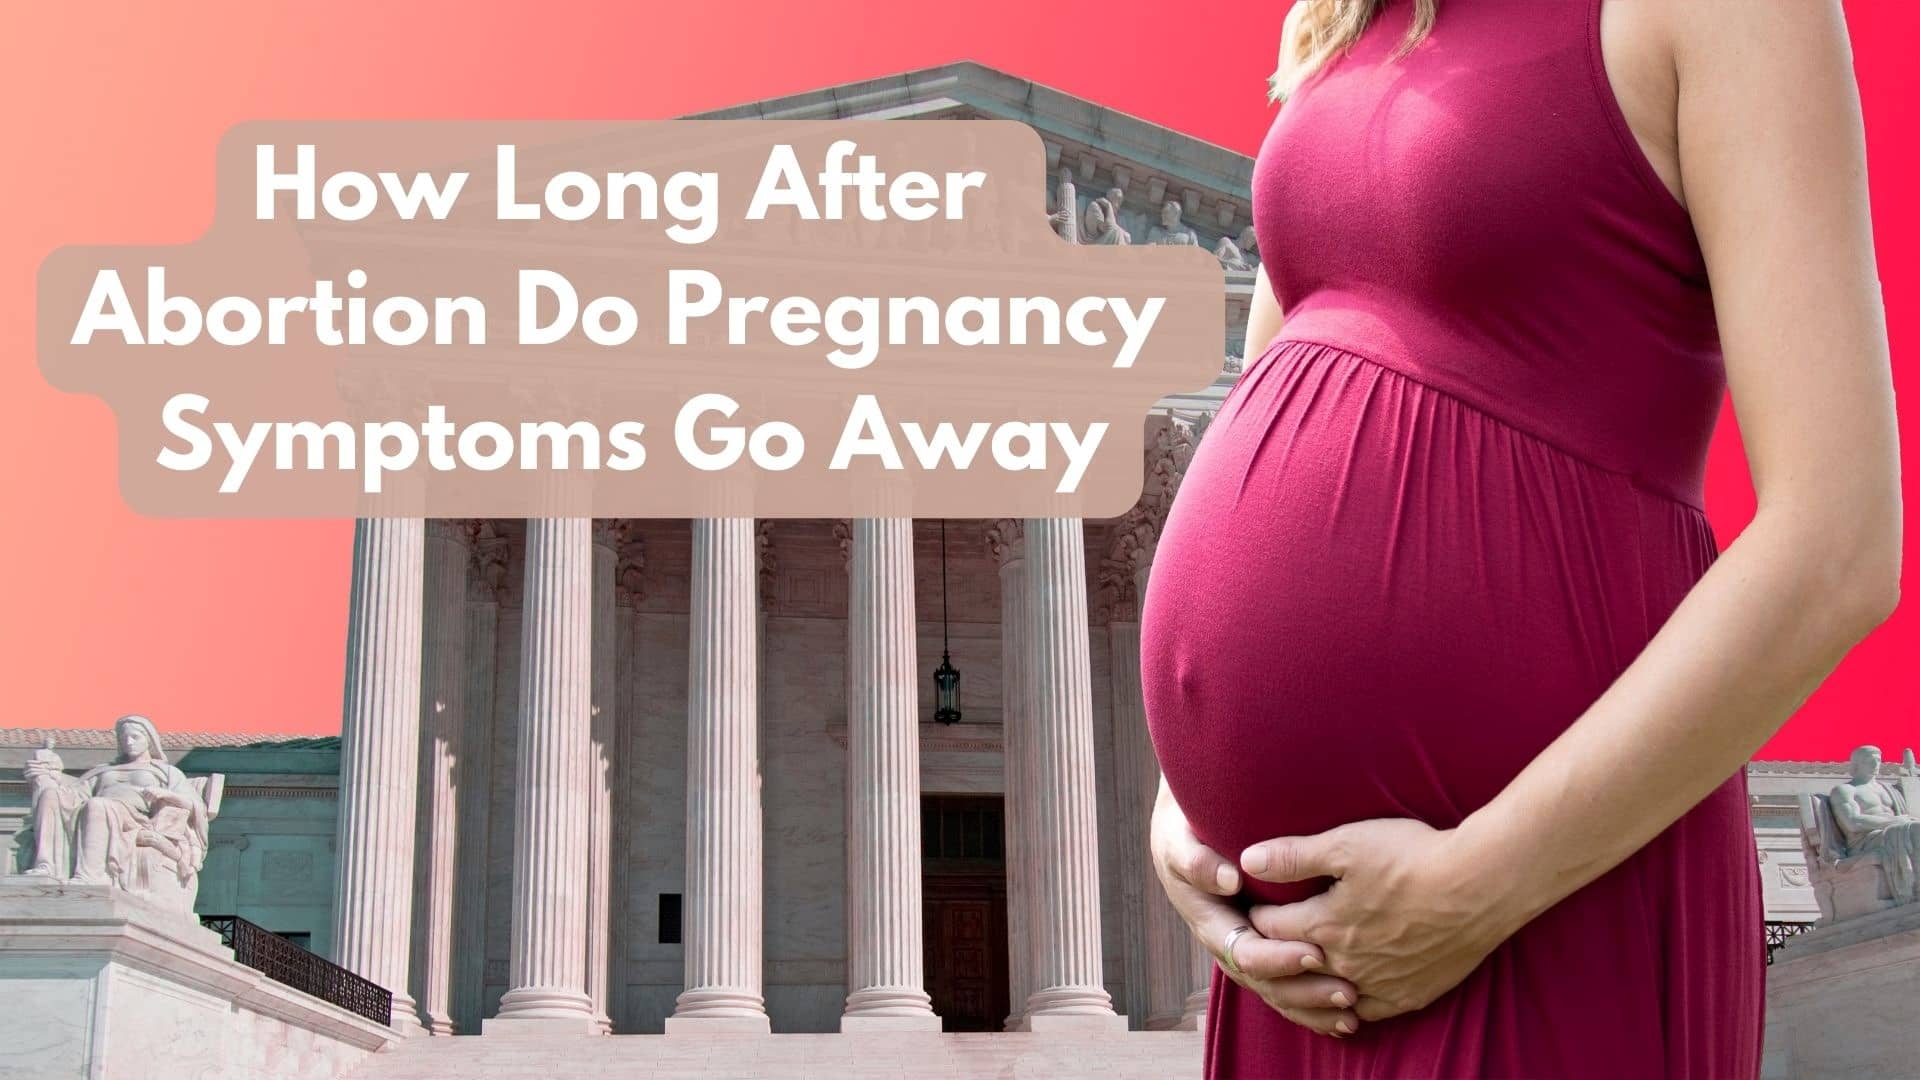 How Long After Abortion Do Pregnancy Symptoms Go Away?